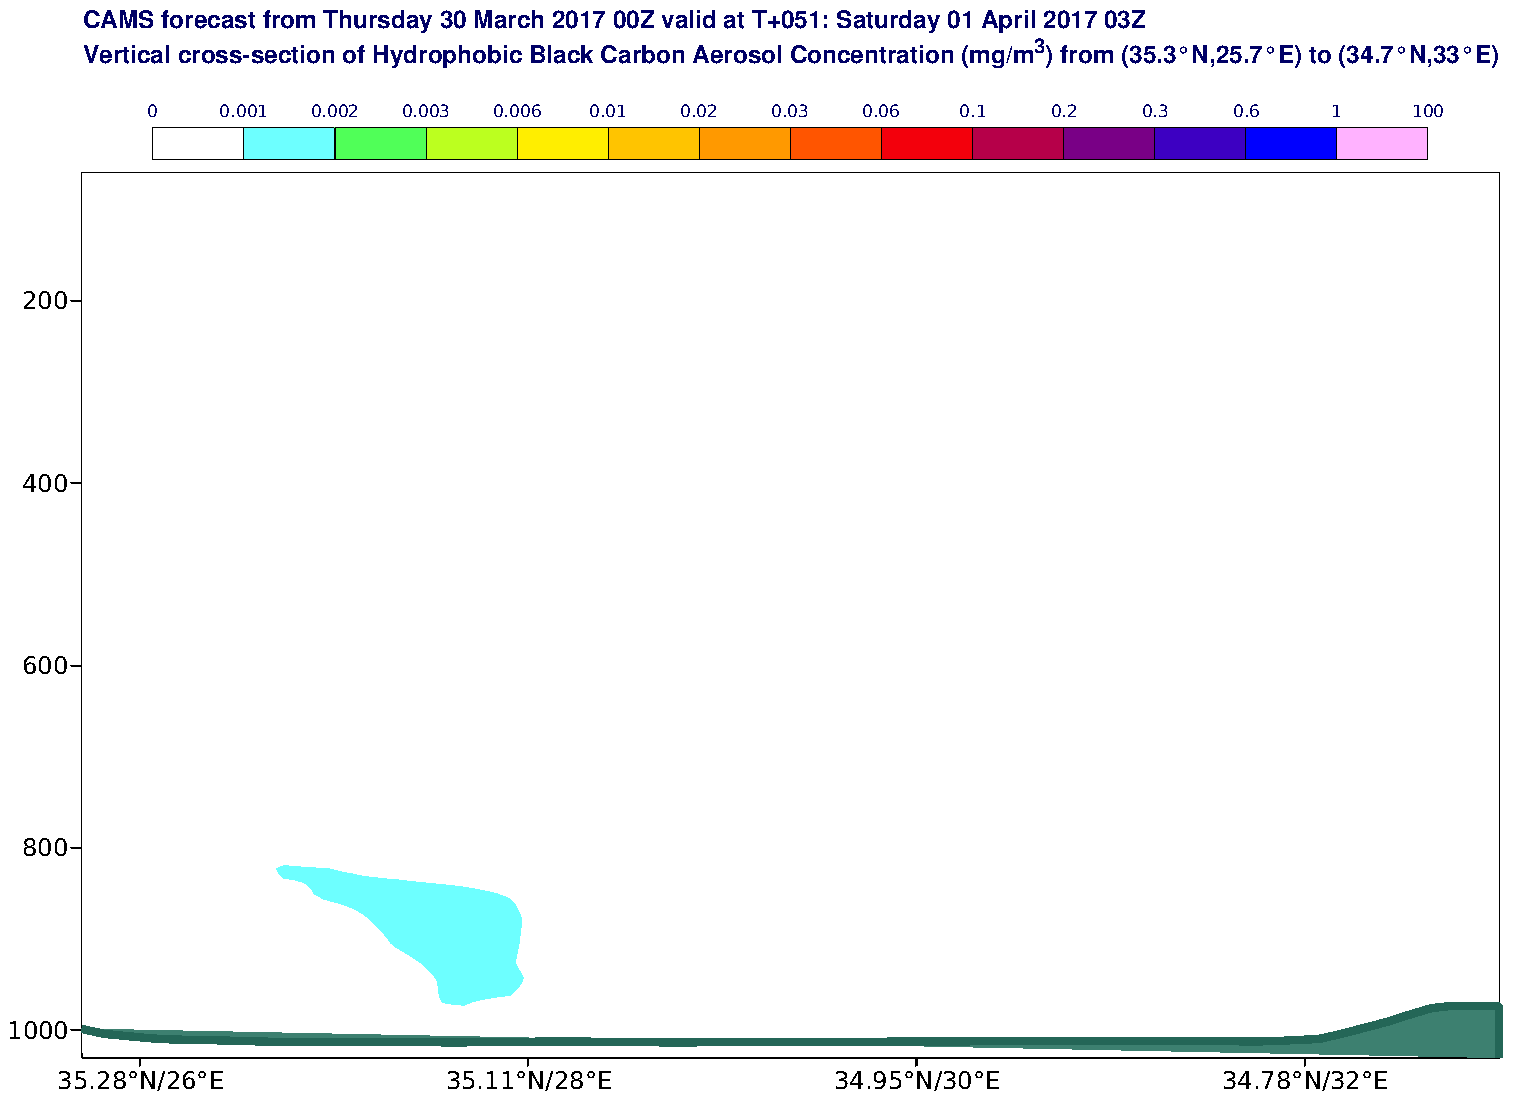 Vertical cross-section of Hydrophobic Black Carbon Aerosol Concentration (mg/m3) valid at T51 - 2017-04-01 03:00